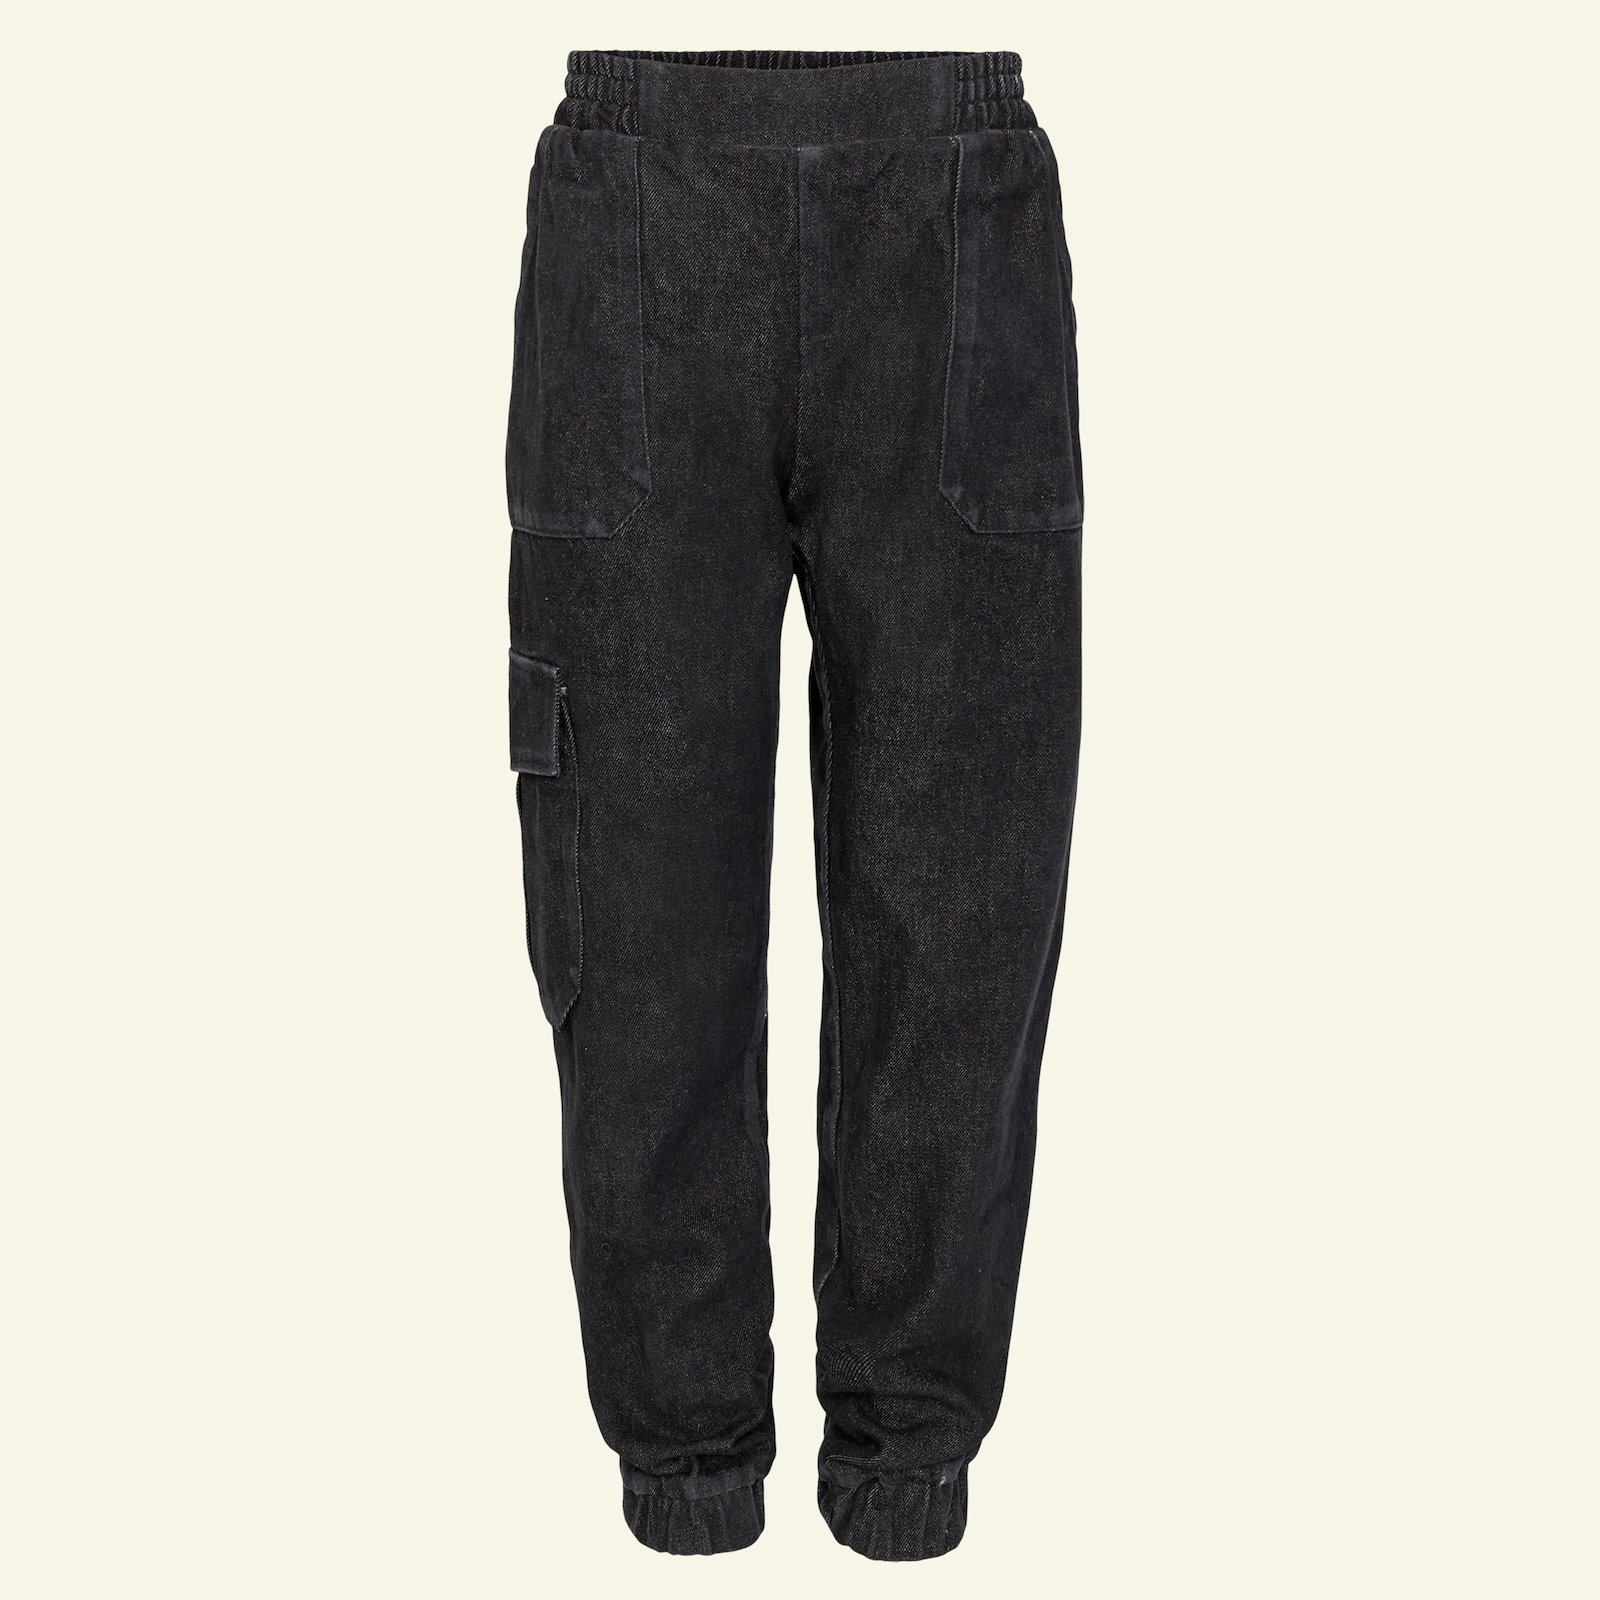 Cargo trousers, 116/6y p60037_5343_sskit